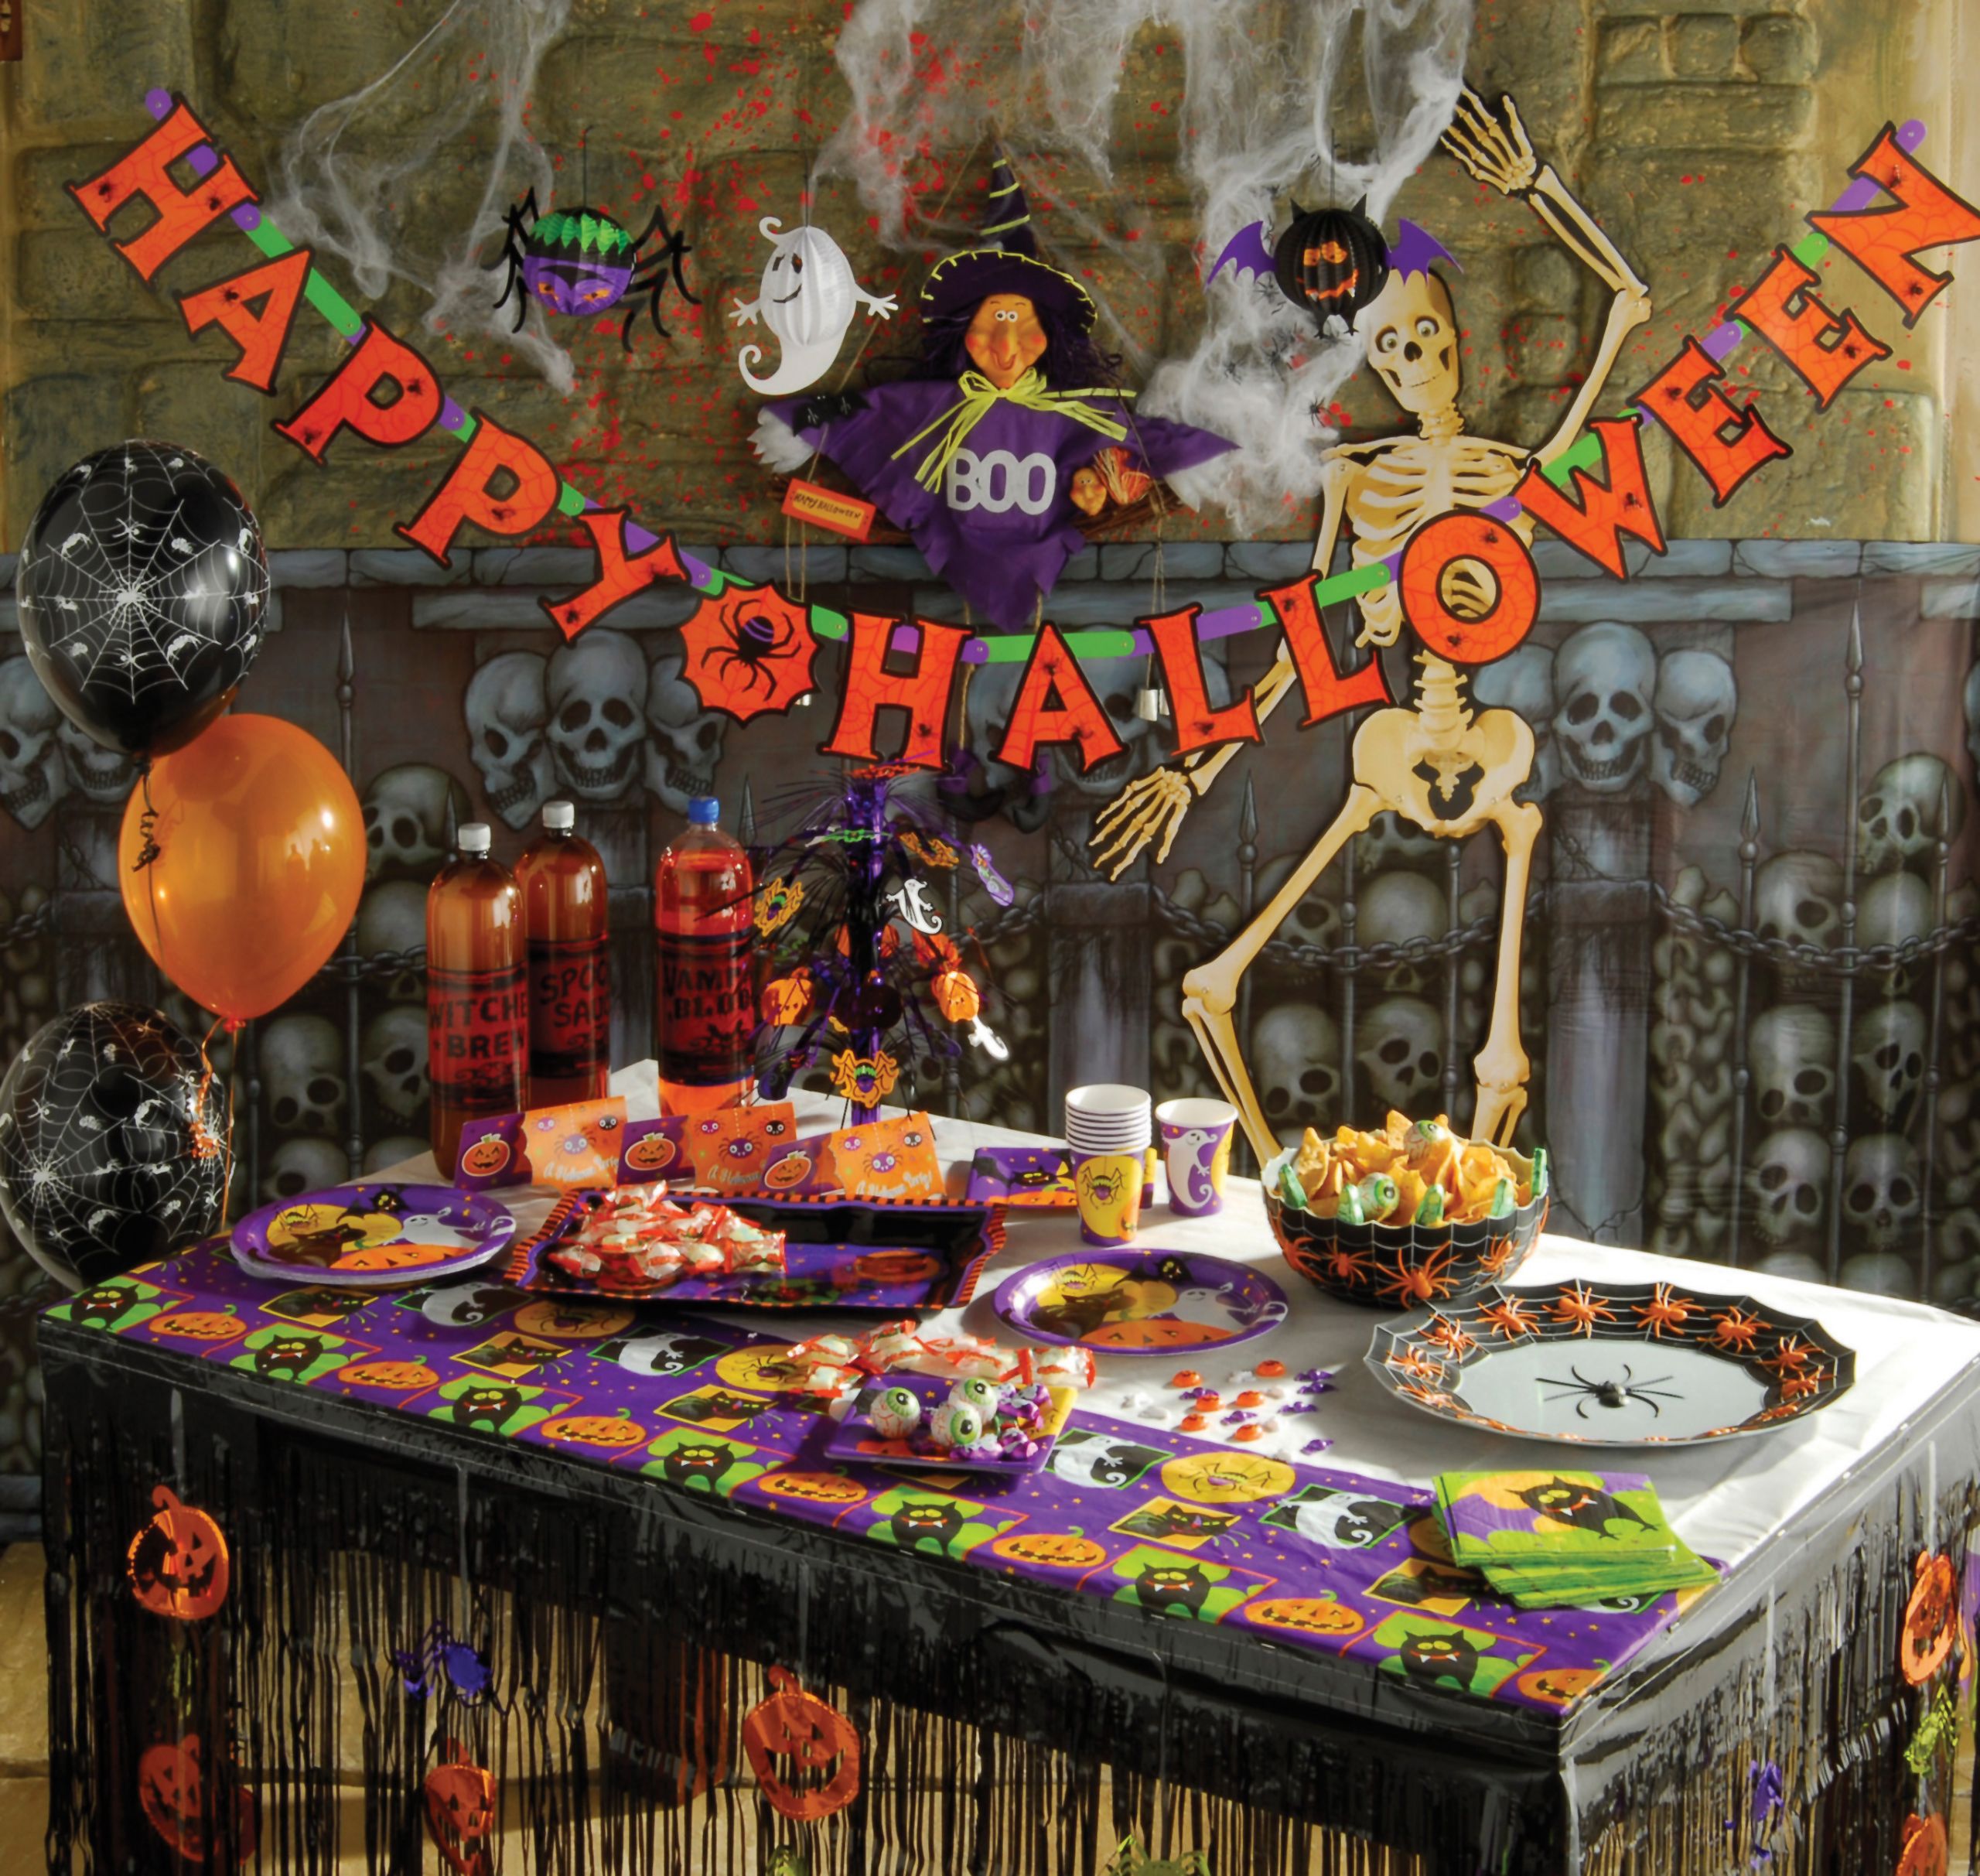 Halloween Decorations Party Ideas
 25 Party Halloween Decorations Ideas MagMent